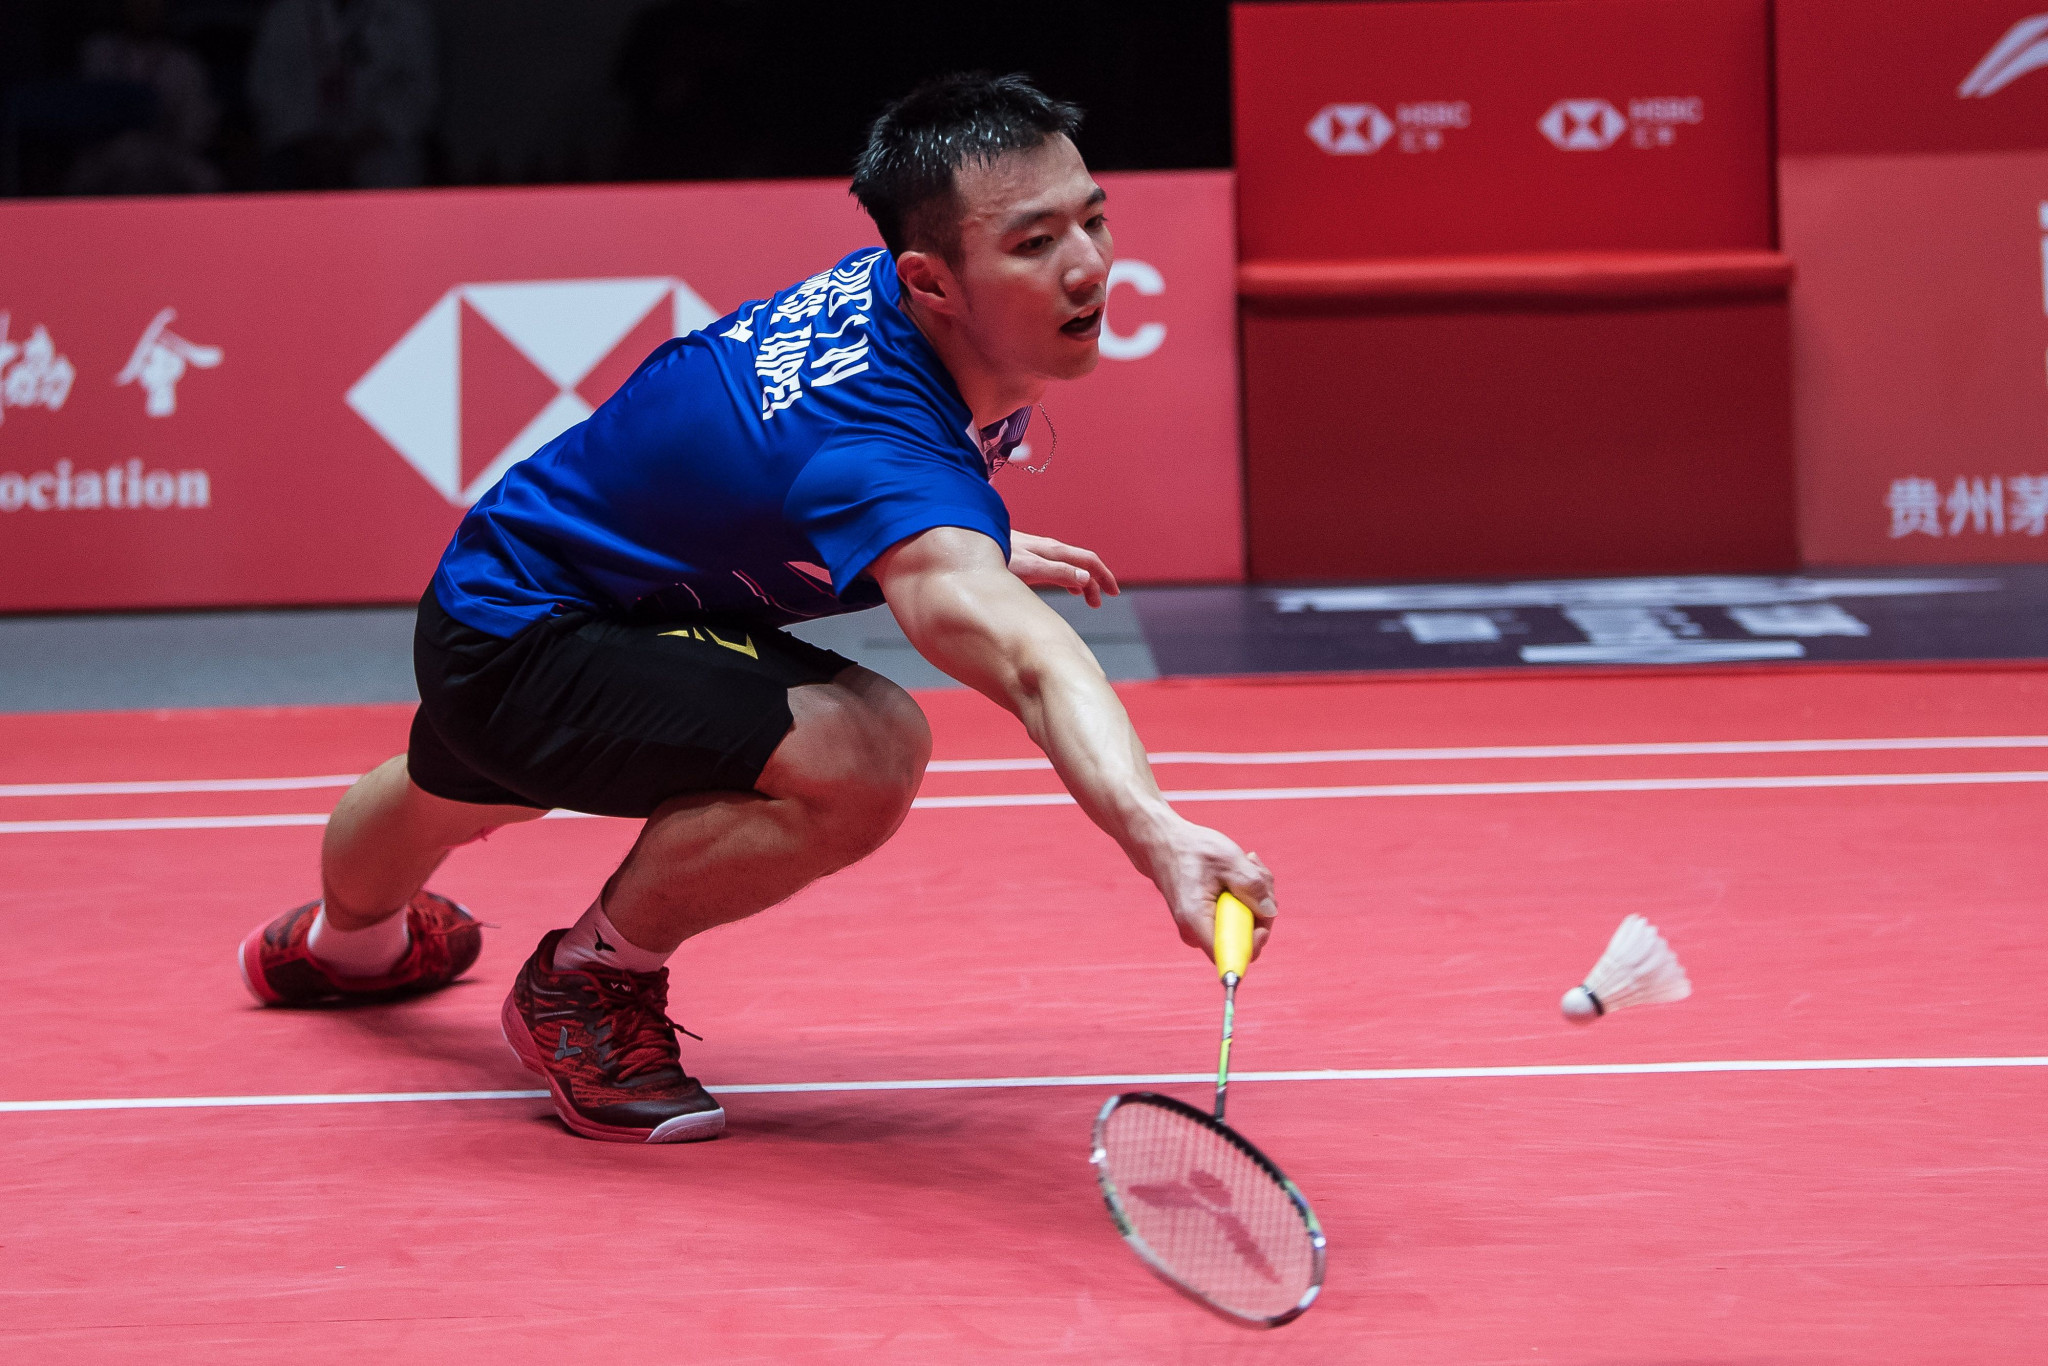 Wang Tzu-wei helped Chinese Taipei claim a 4-1 win over Singapore at the Badminton Asia Team Championships in Manila today ©Getty Images